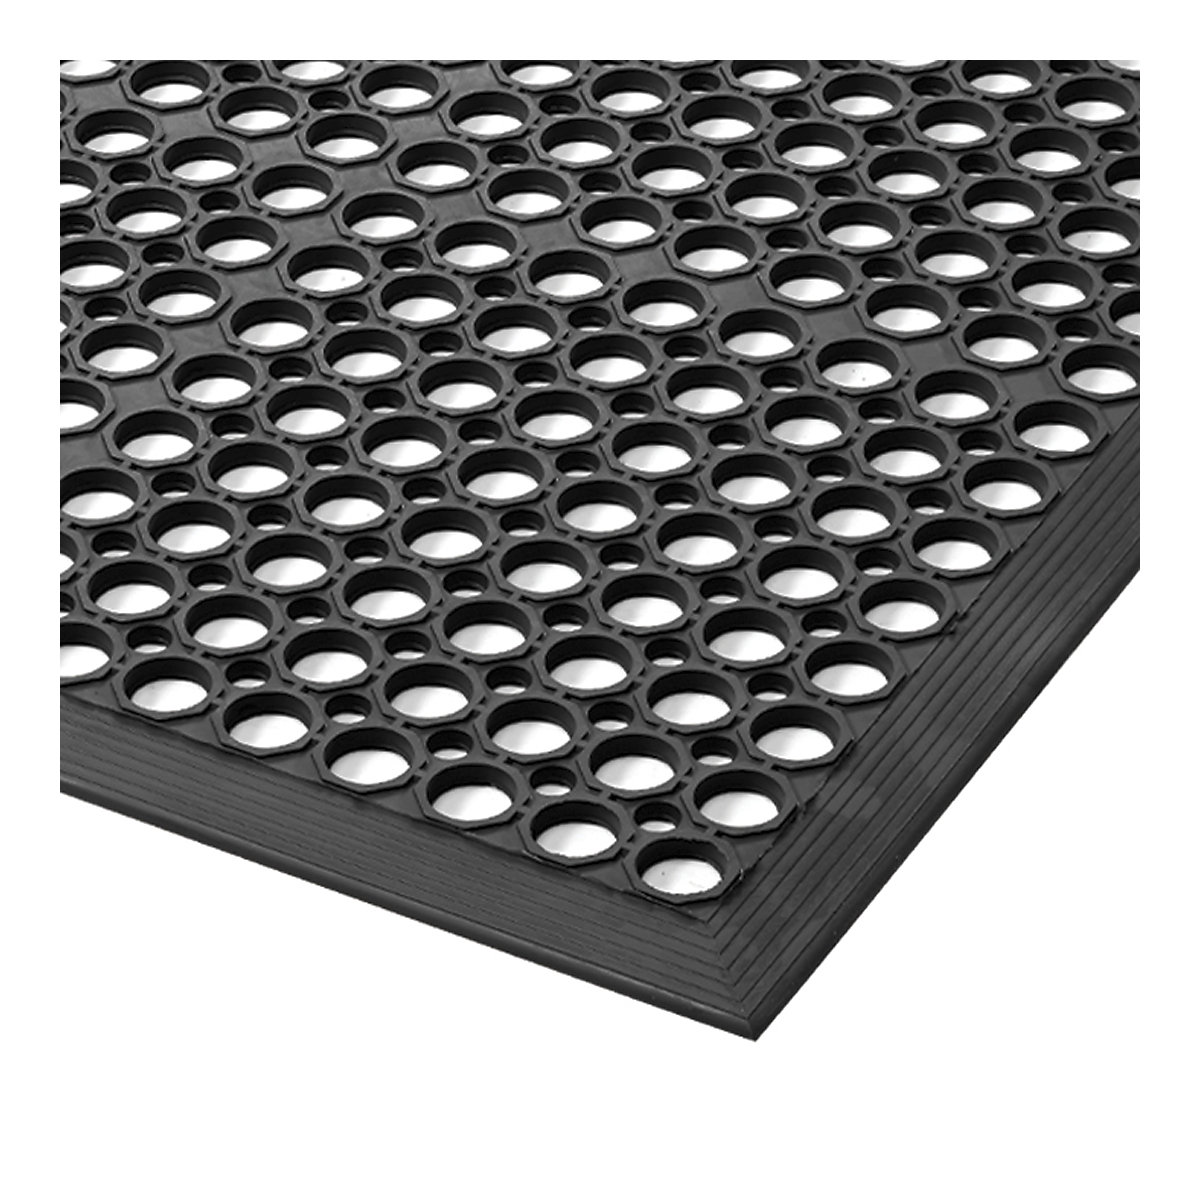 Sanitop perforated workstation matting – NOTRAX, WxH 910 x 12.7 mm, length 2970 mm-2